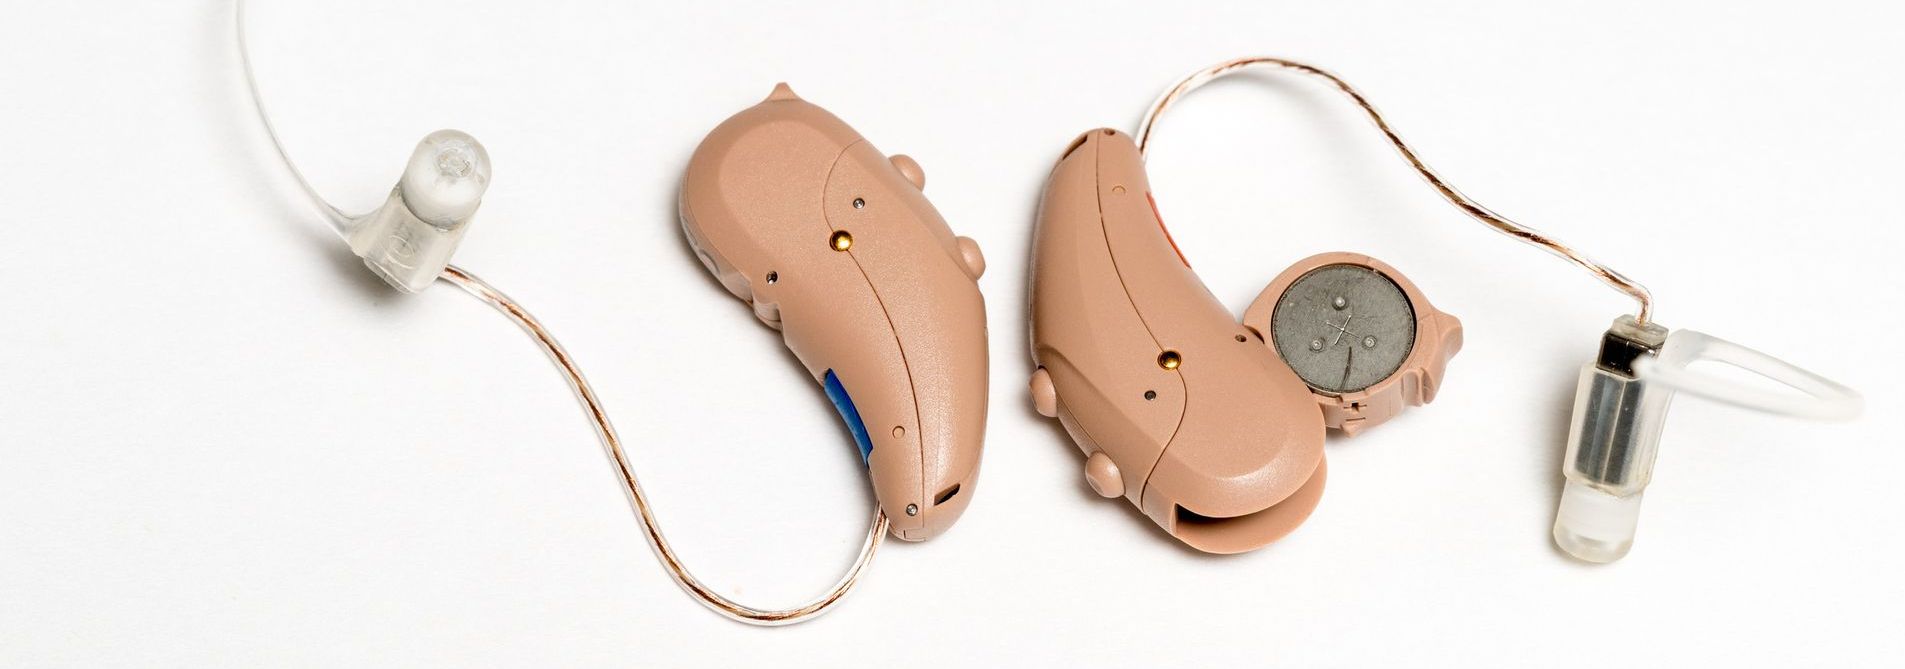 A photo of a pair of hearing aids